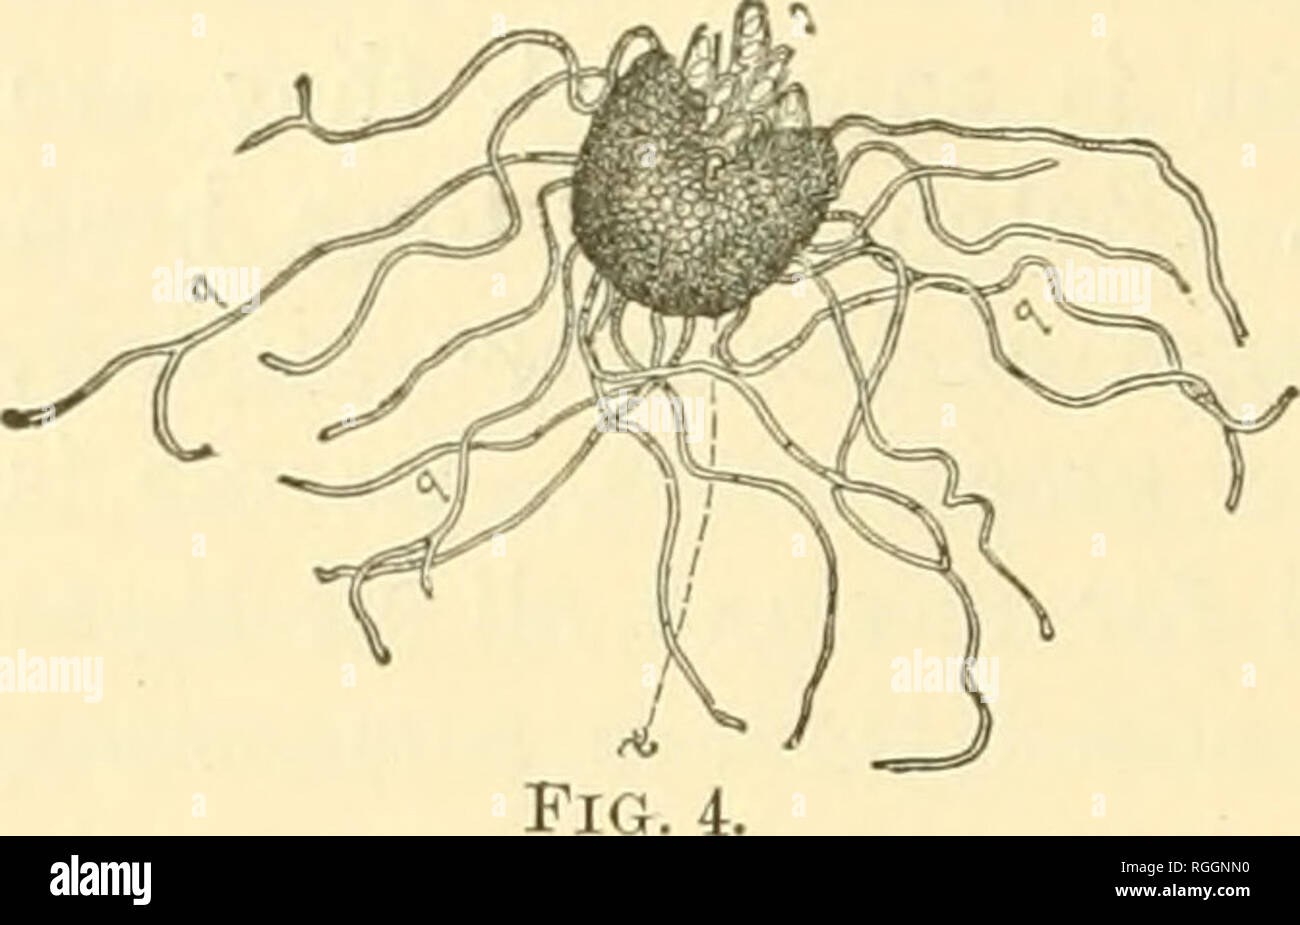 . Bulletin of the Illinois State Laboratory of Natural History. Natural history -- Illinois. Illinois State Laboratory of NaturaljHistory.. FiGUEE 4. Erysiphe chicoracearum, DC. A ruptured perithecium with thread-like appendages and protrud- ing asci, each containing two spores, — magnified 90 times. n i^lk ^t4.l*' Figure 5. Uncinula am- pelopsidis, Peck: a, perithe- cium with the numerous appendages (6) coiled at the tip,— magnified 100 times; c, ^^^ one of the appendages (tip) further magnified; d,anas- cus with five spores,—magni- fied 200 times. The lower, pointed end of the ascus is atta Stock Photo